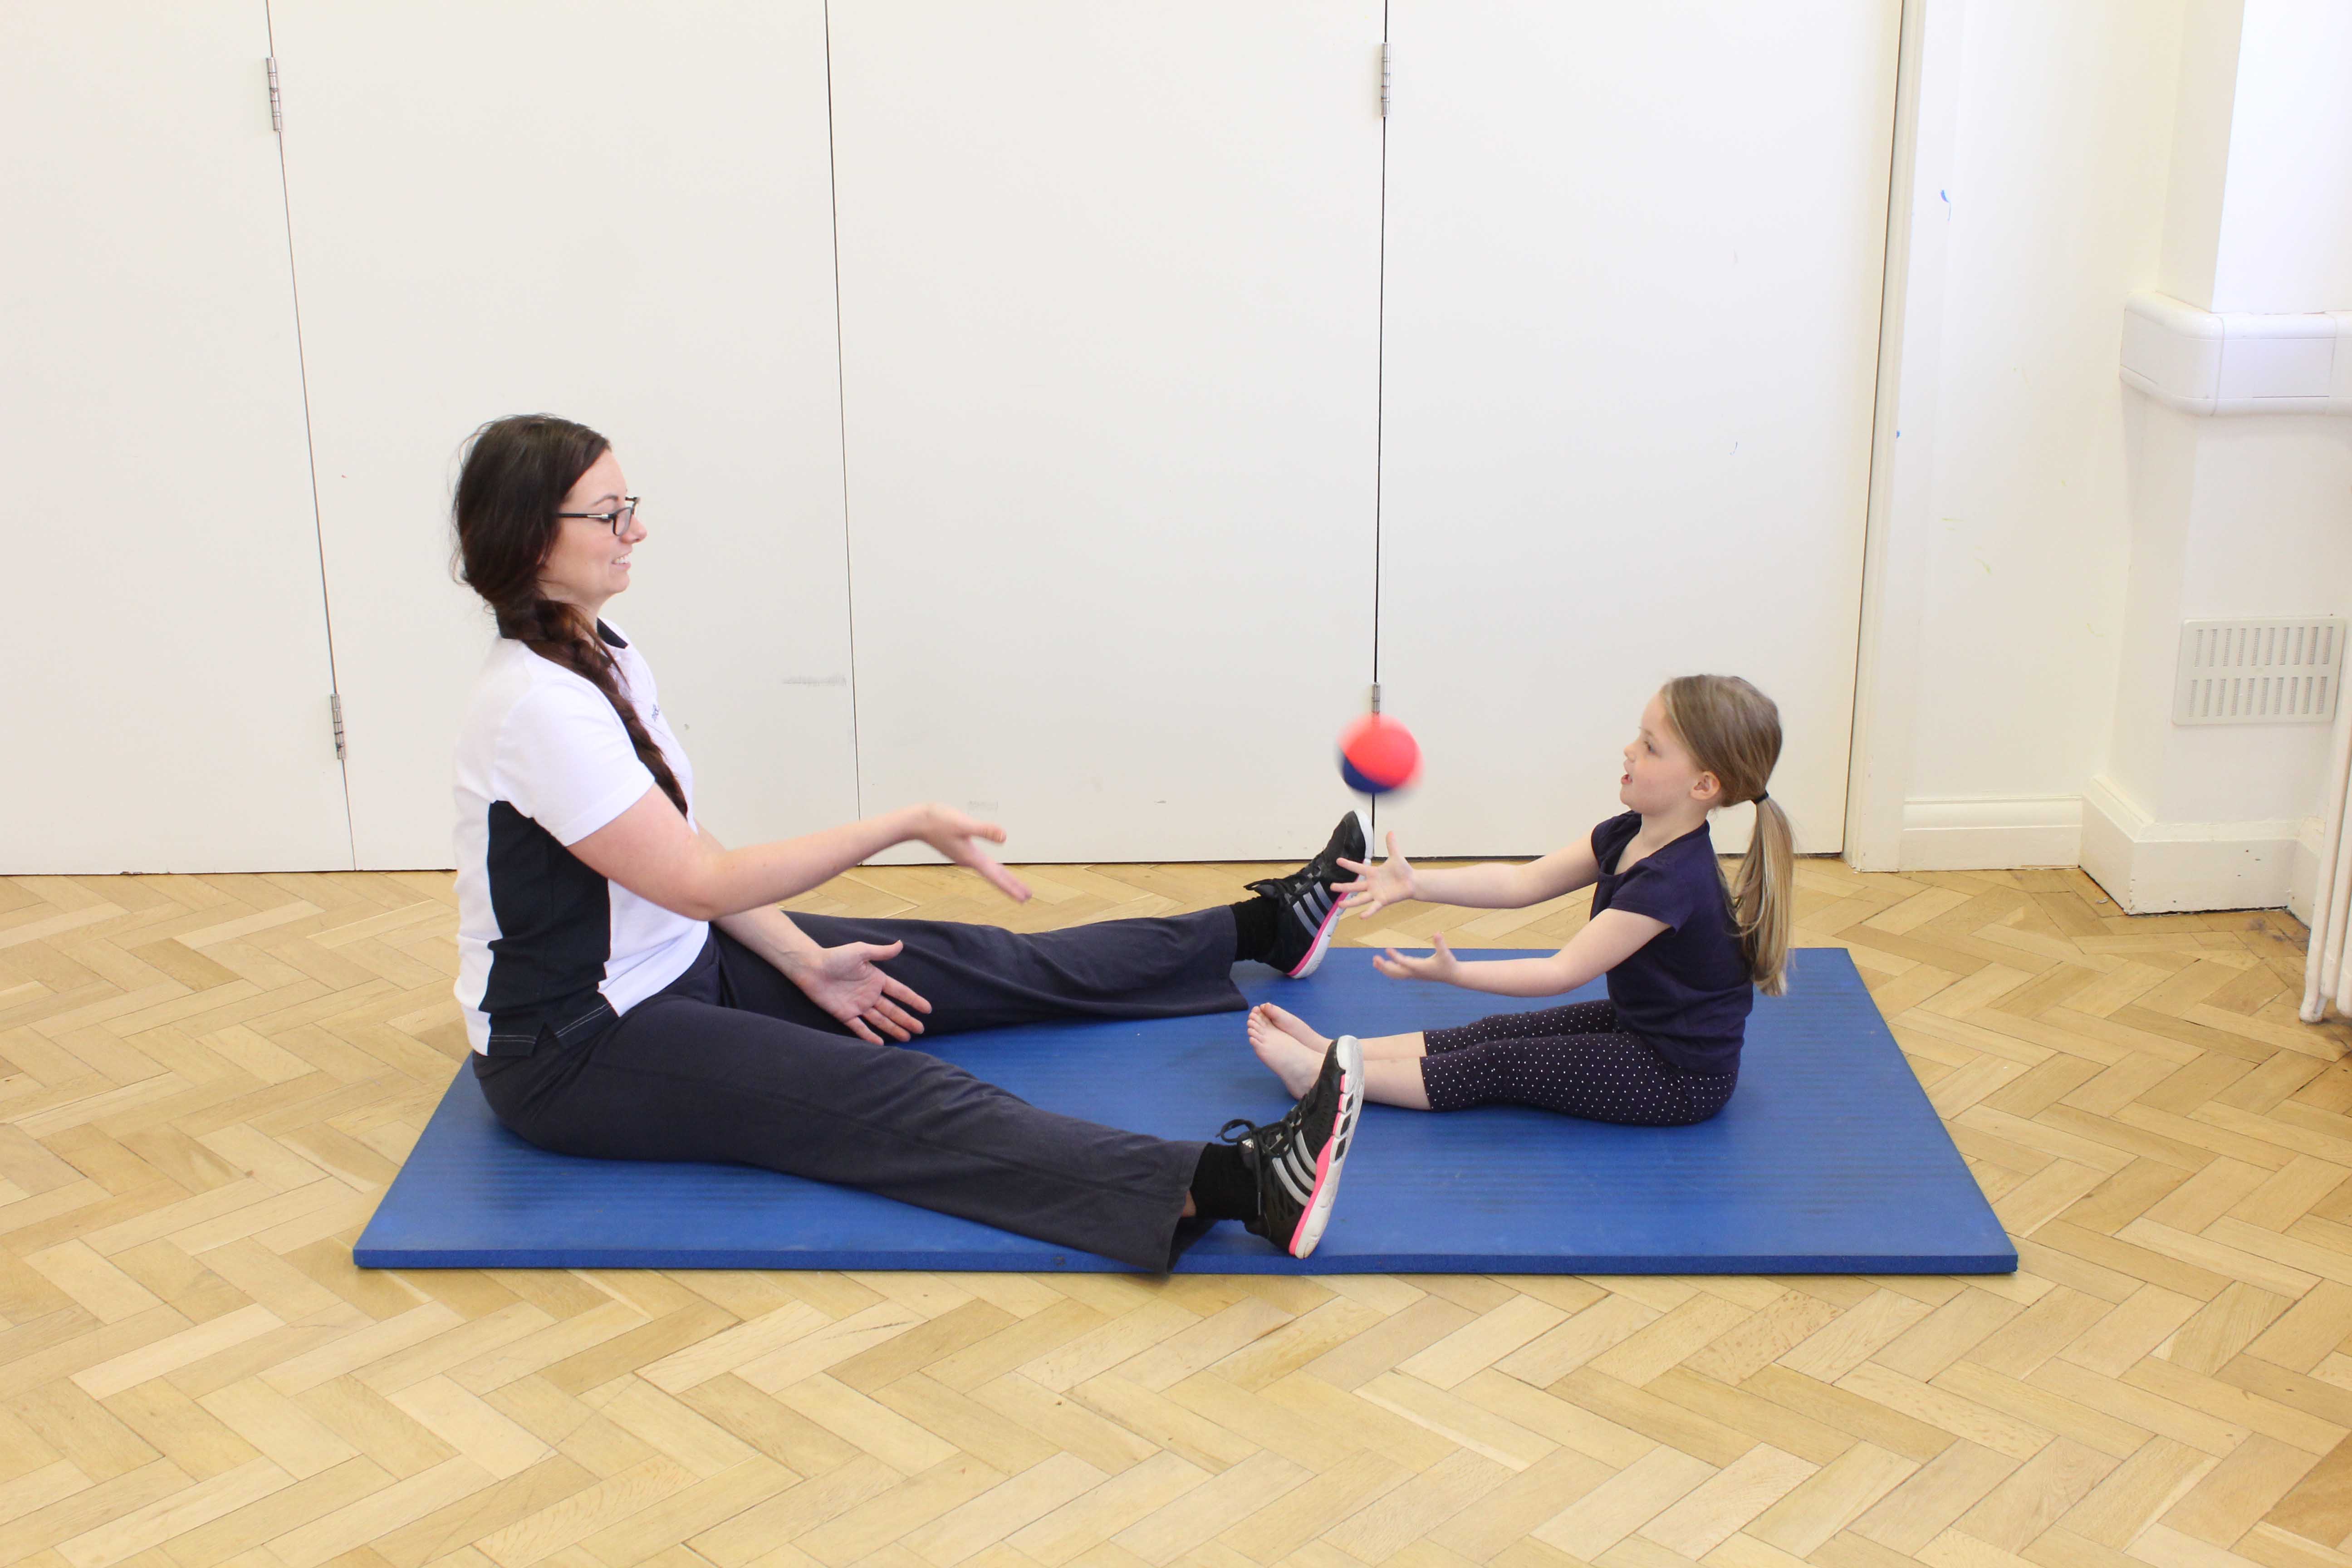 Gross motor skill exercises supervised by a specilaist neurological physiotherapist